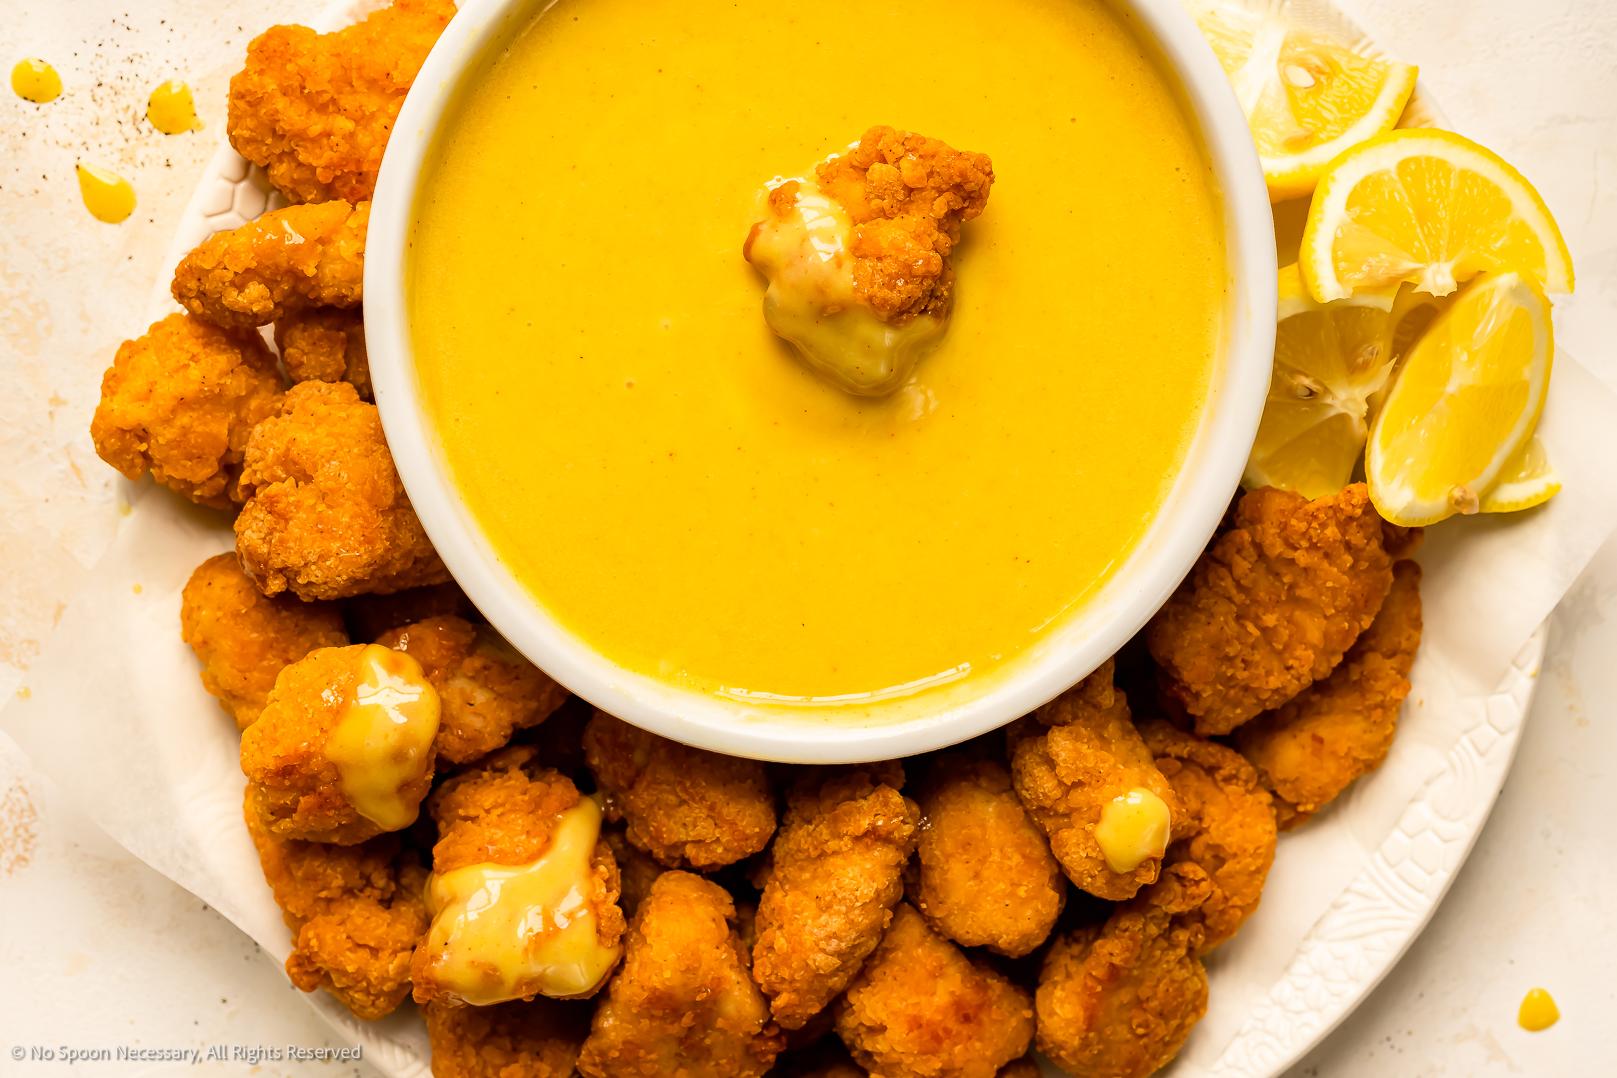  The ultimate condiment for your chicken nugget cravings.